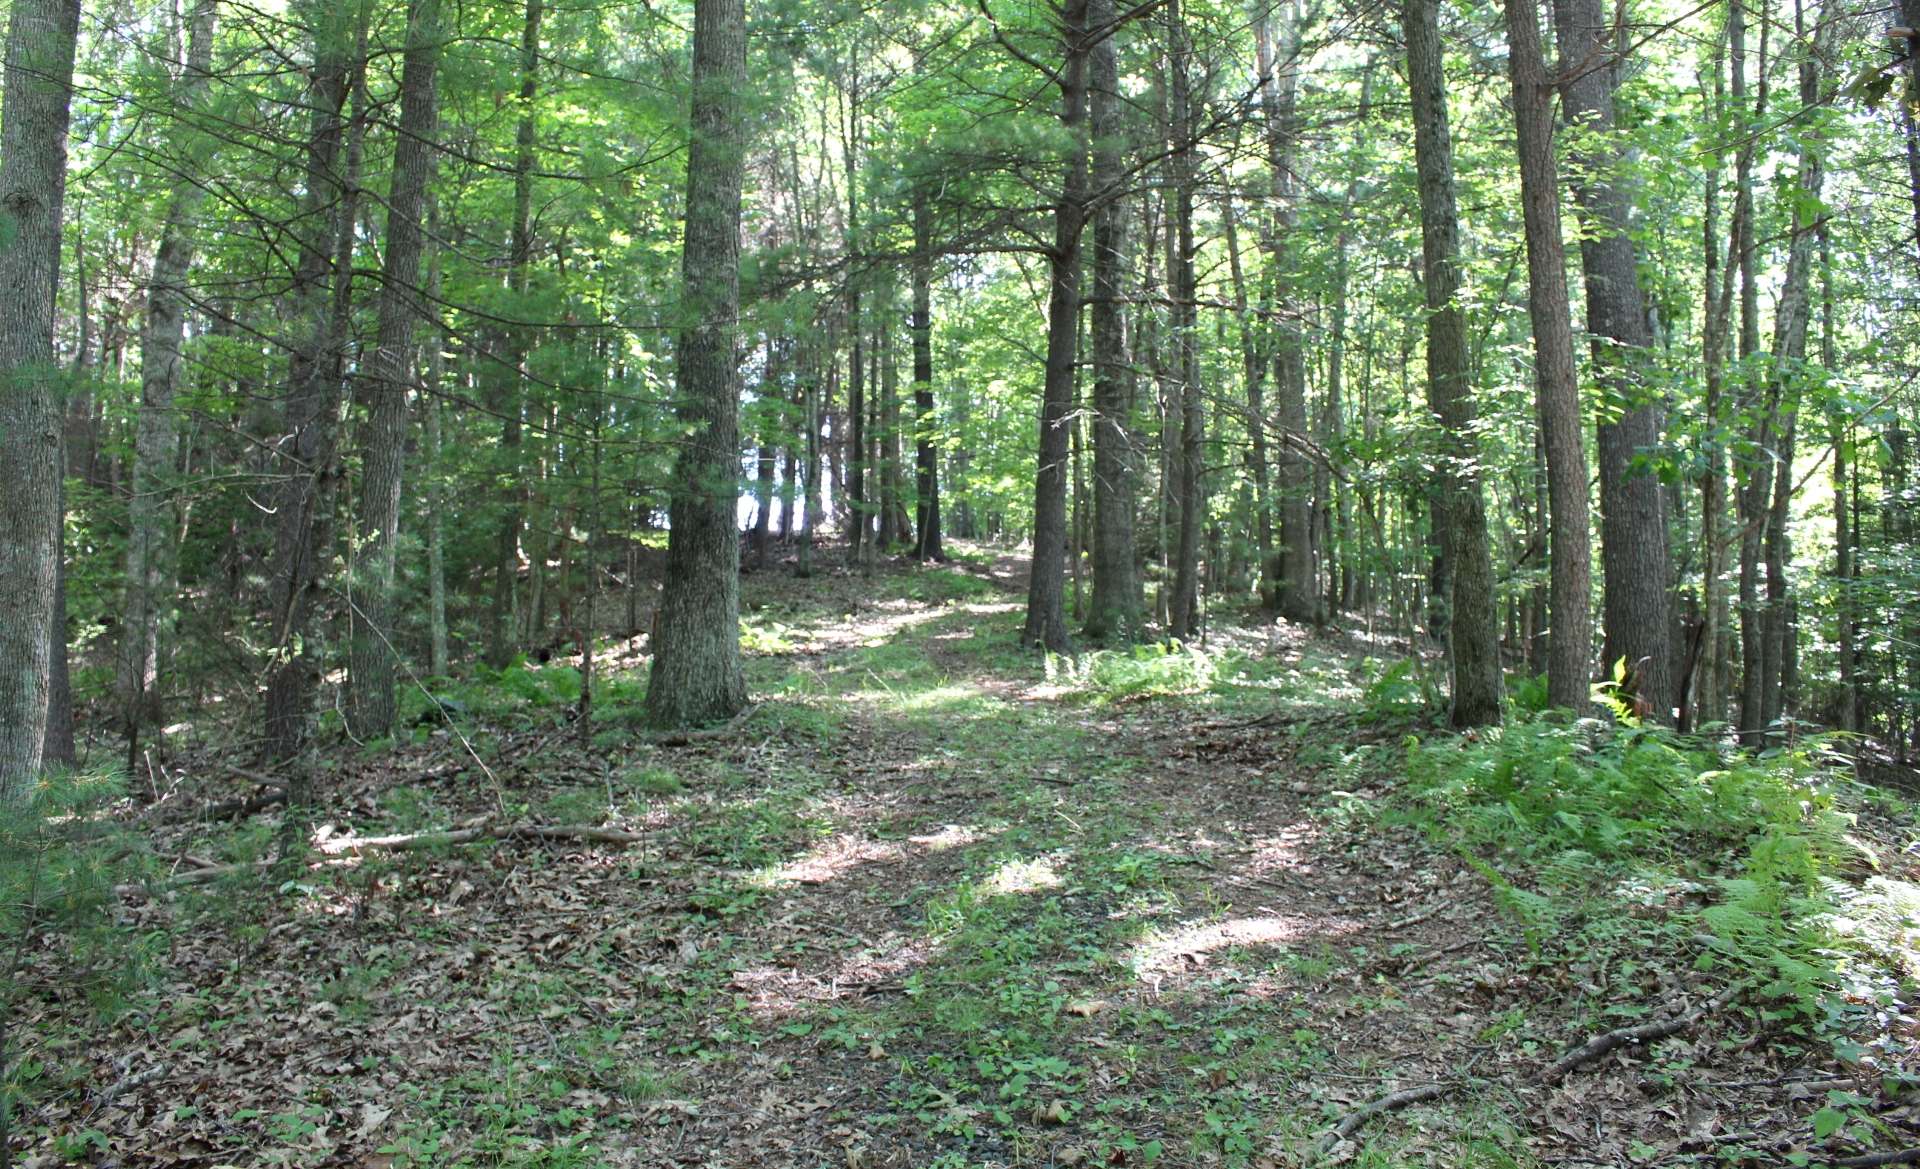 Misty Cove contains only six large lots and offers underground utilities.  Lot 5 is a gently sloping 4.648 wooded tract filled with large white pine, hardwoods and rhododendron, the perfect environment for abundant wildlife.